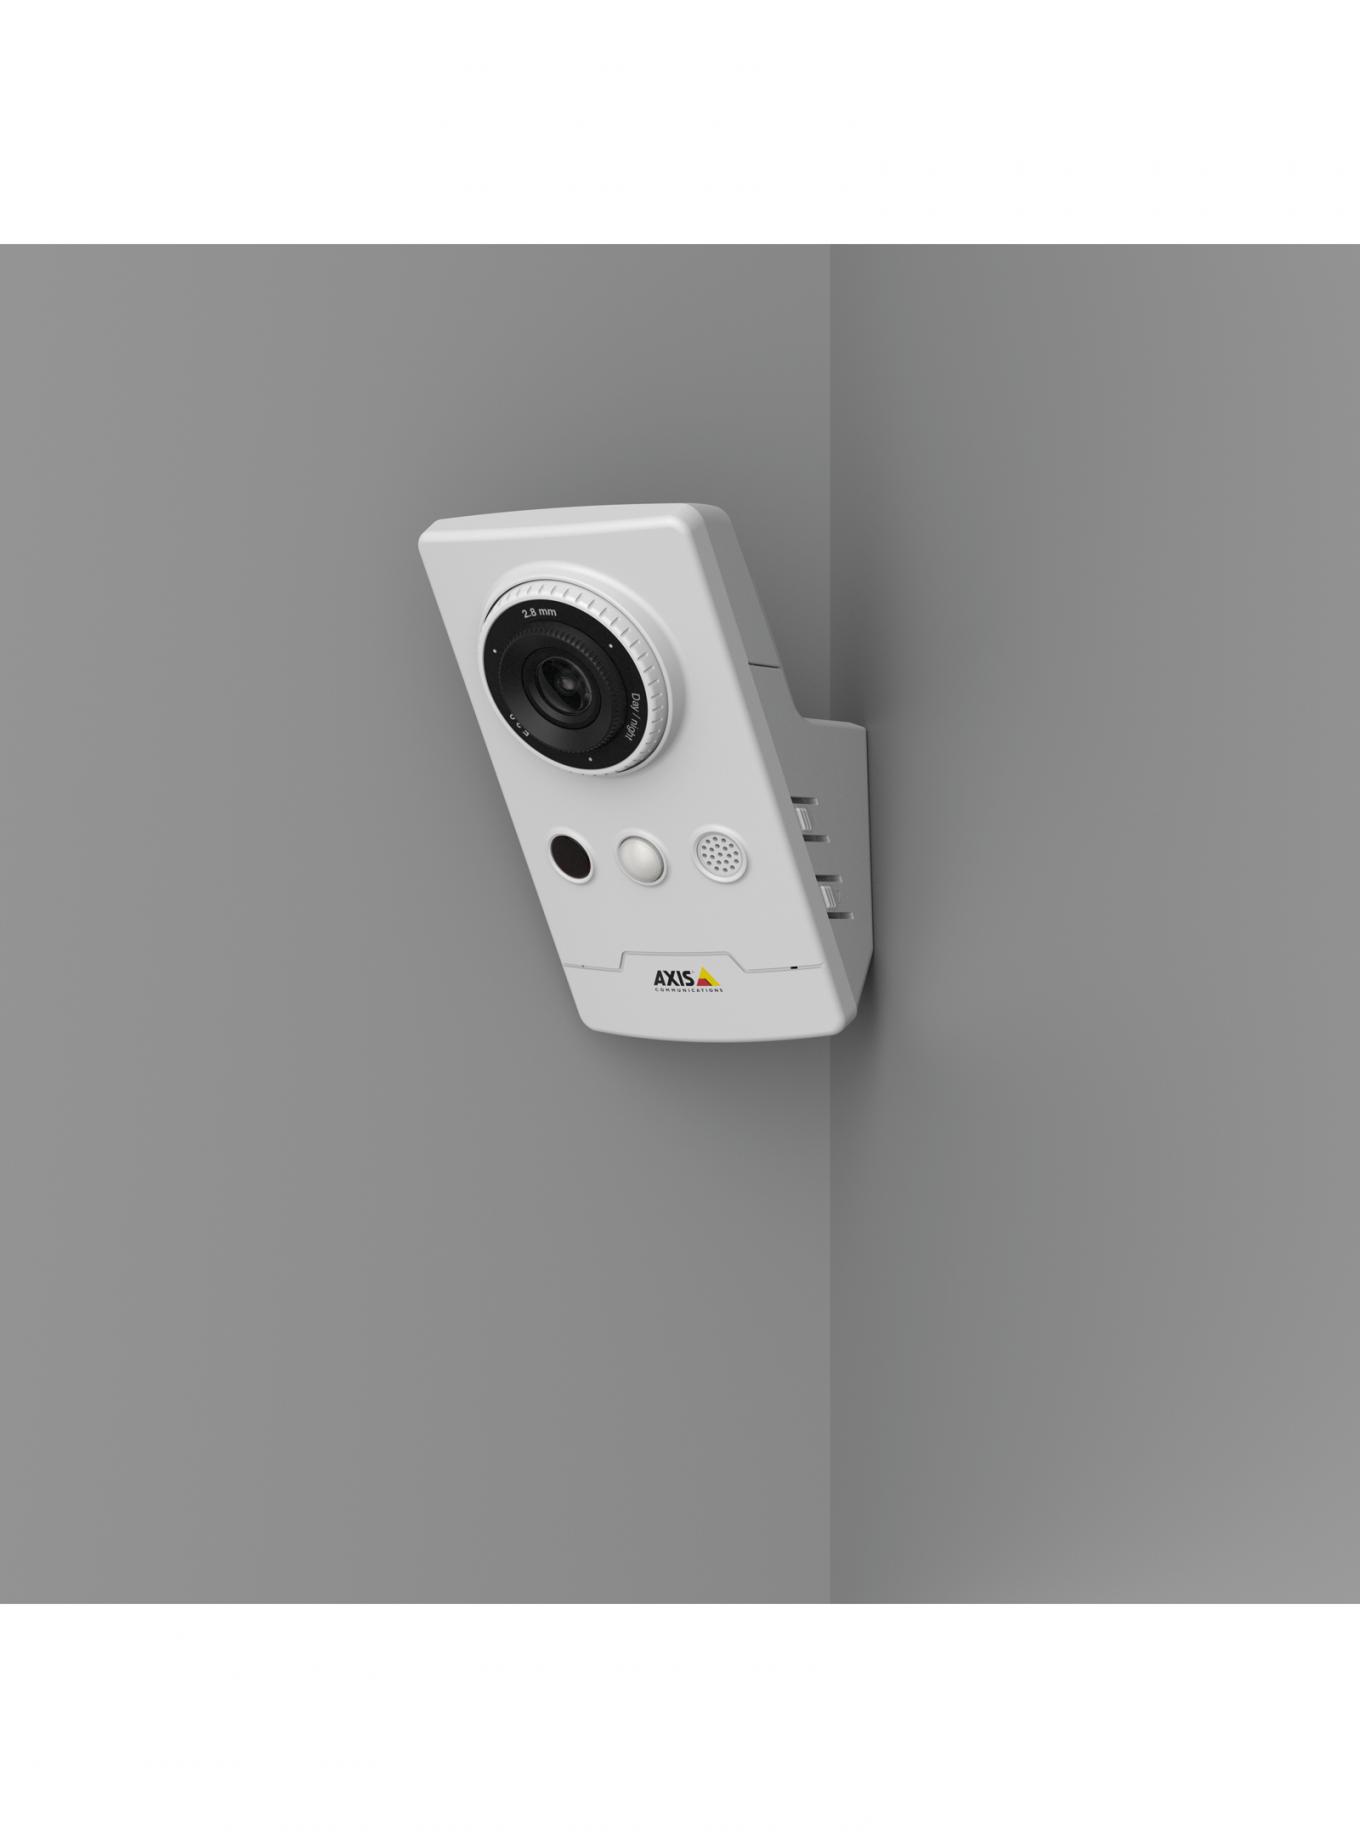 AXIS M1065-L IP Camera mounted on a grey wall in the corner